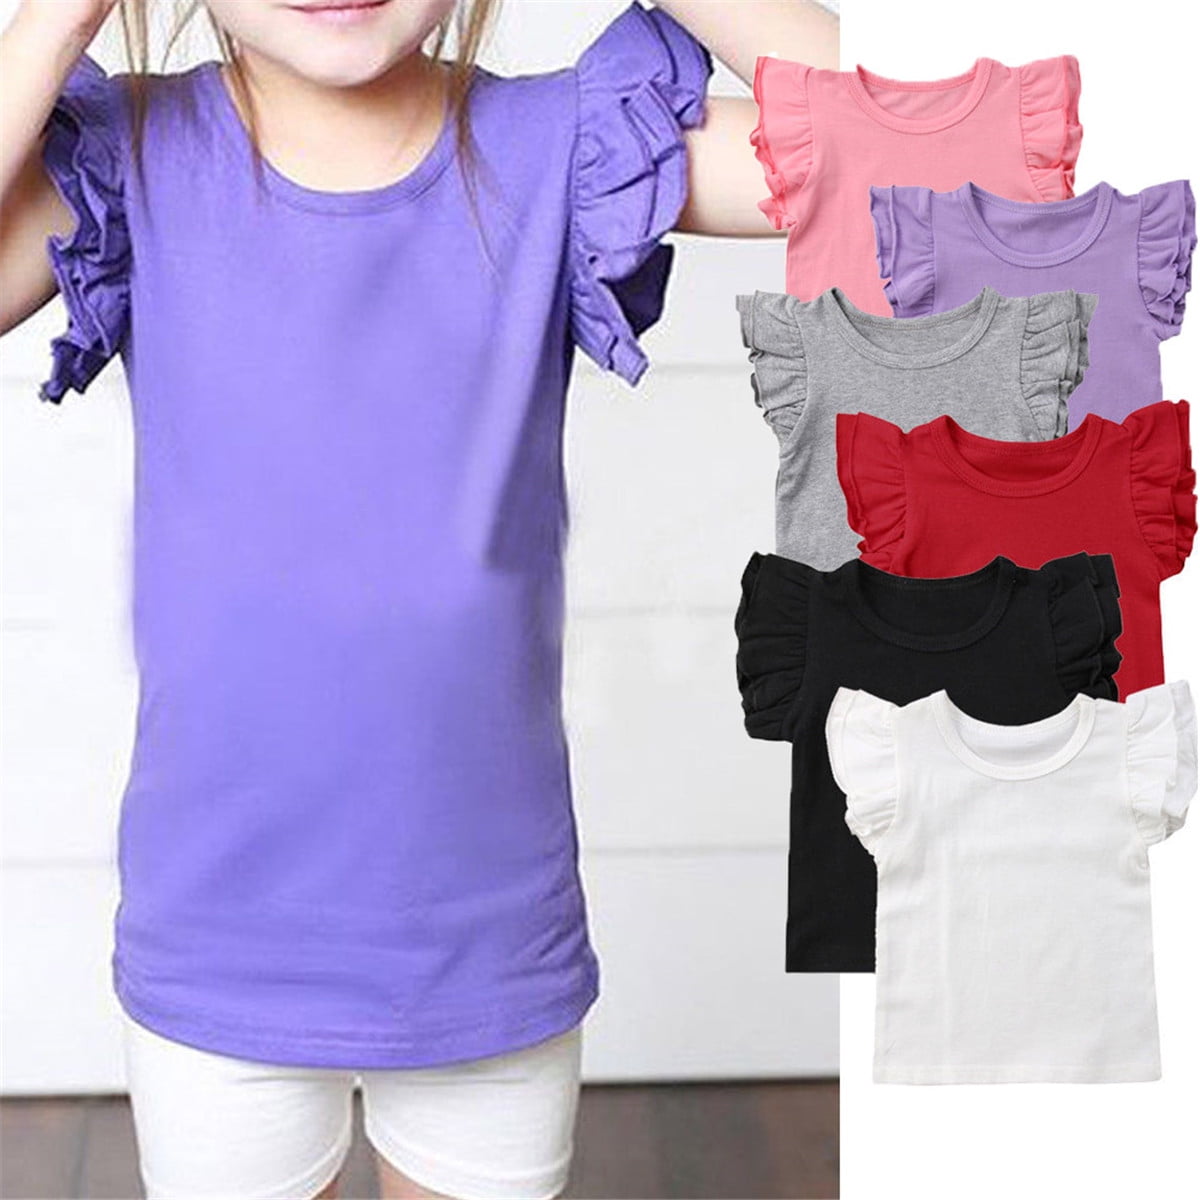 Baby Little Girls Long Sleeve Shirts Turtleneck T-Shirt Tops Basic Solid Color Blouse Outfit for Toddler Kids Girl